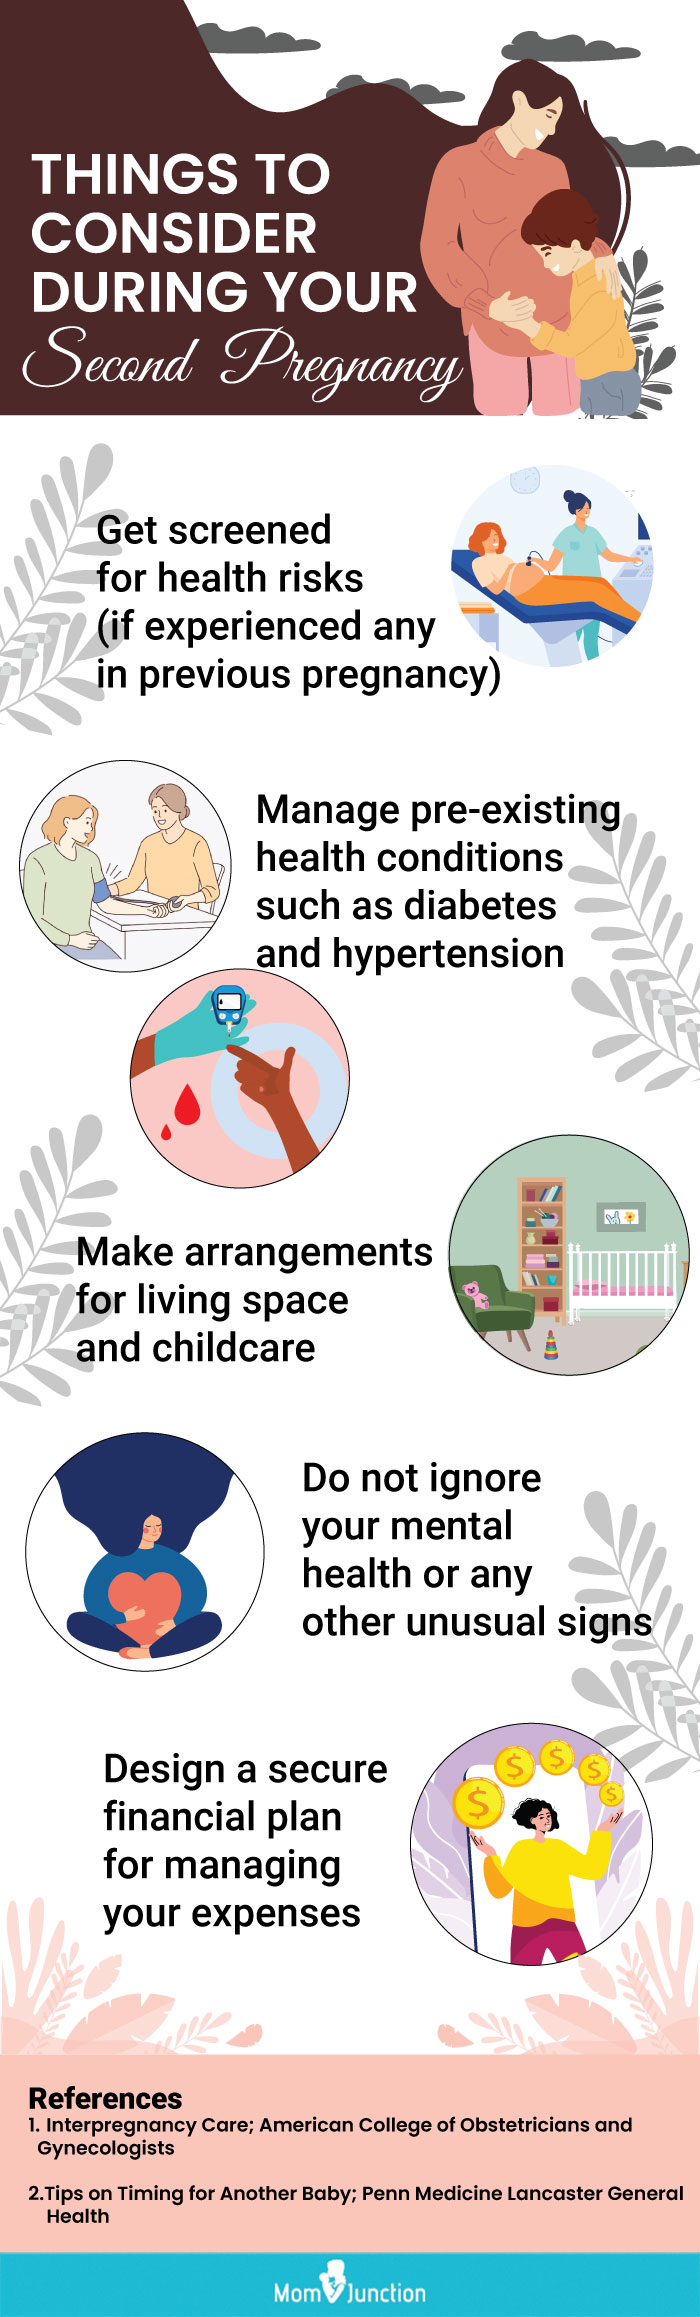 care tips for second pregnancy (infographic)